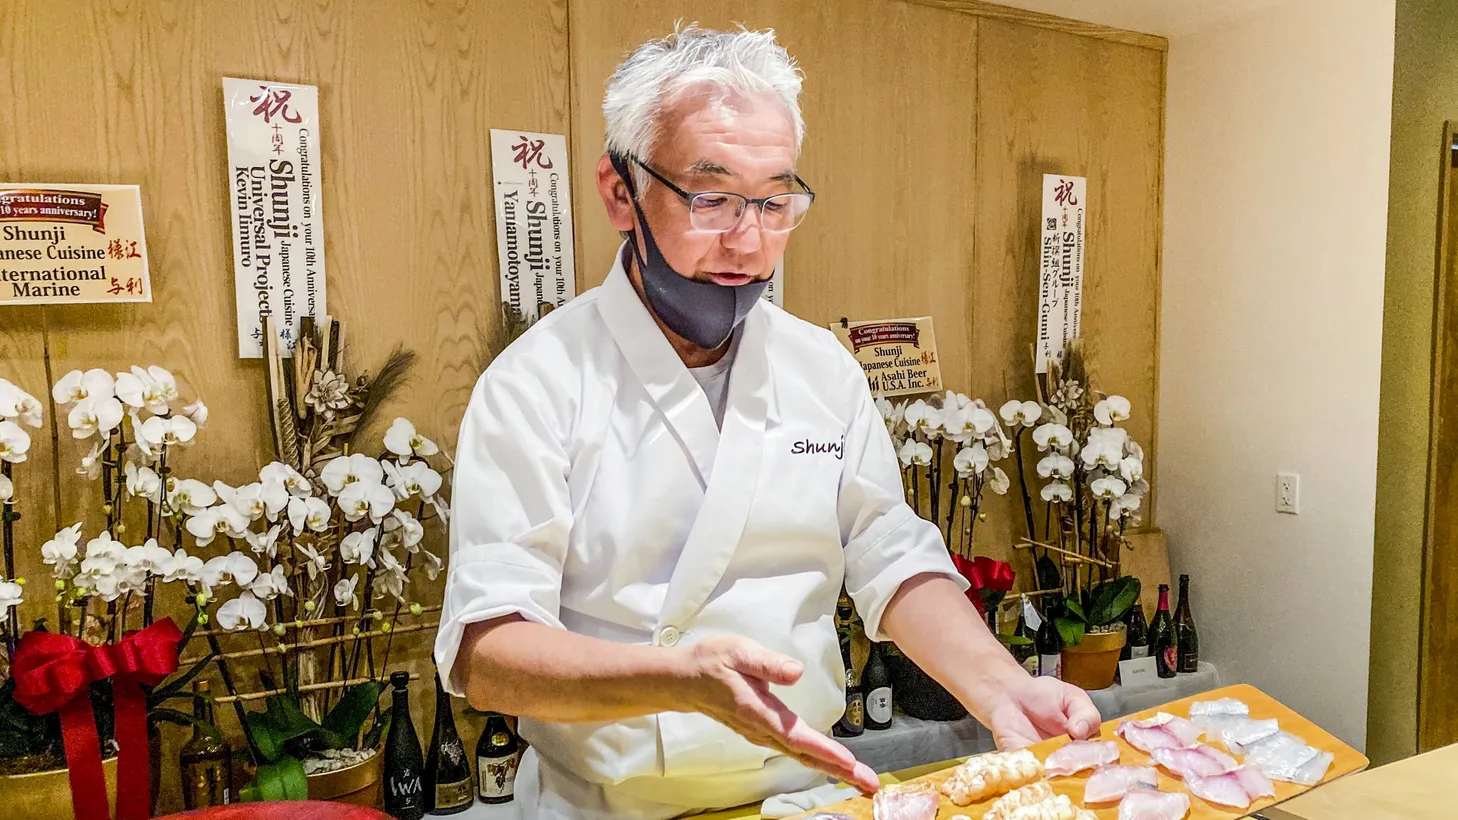 Shunji Nakao has been on the LA sushi scene since arriving from Japan in 1984.